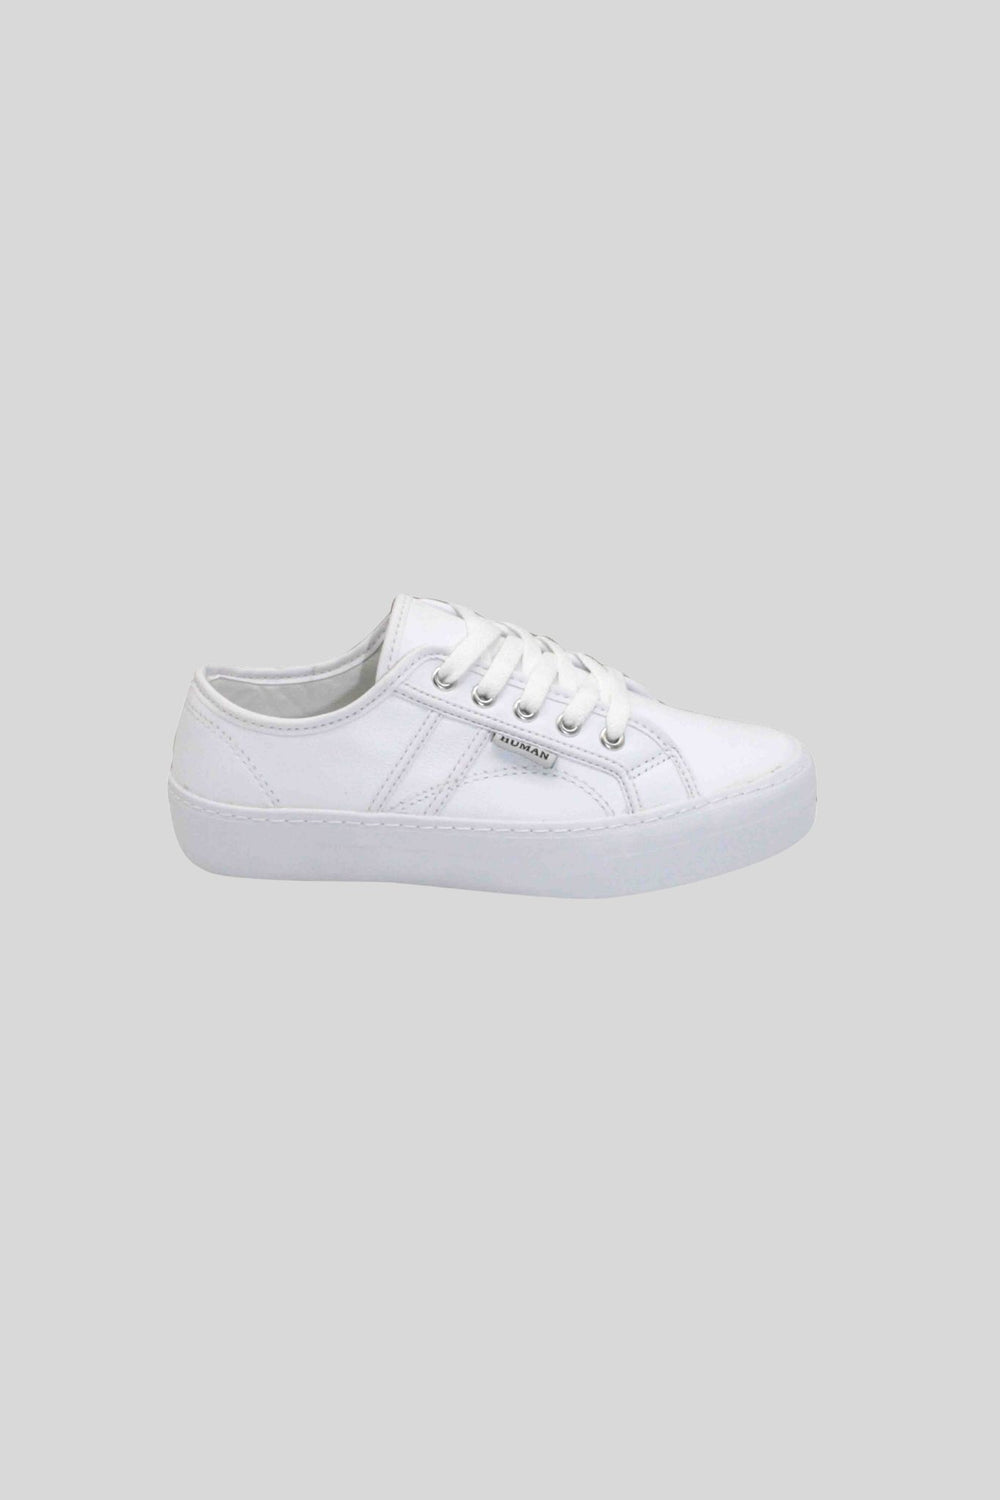 Women's Casual Sports Shoes, White Sneakers for Sale Australia| New  Collection Online| SHEIN Australia